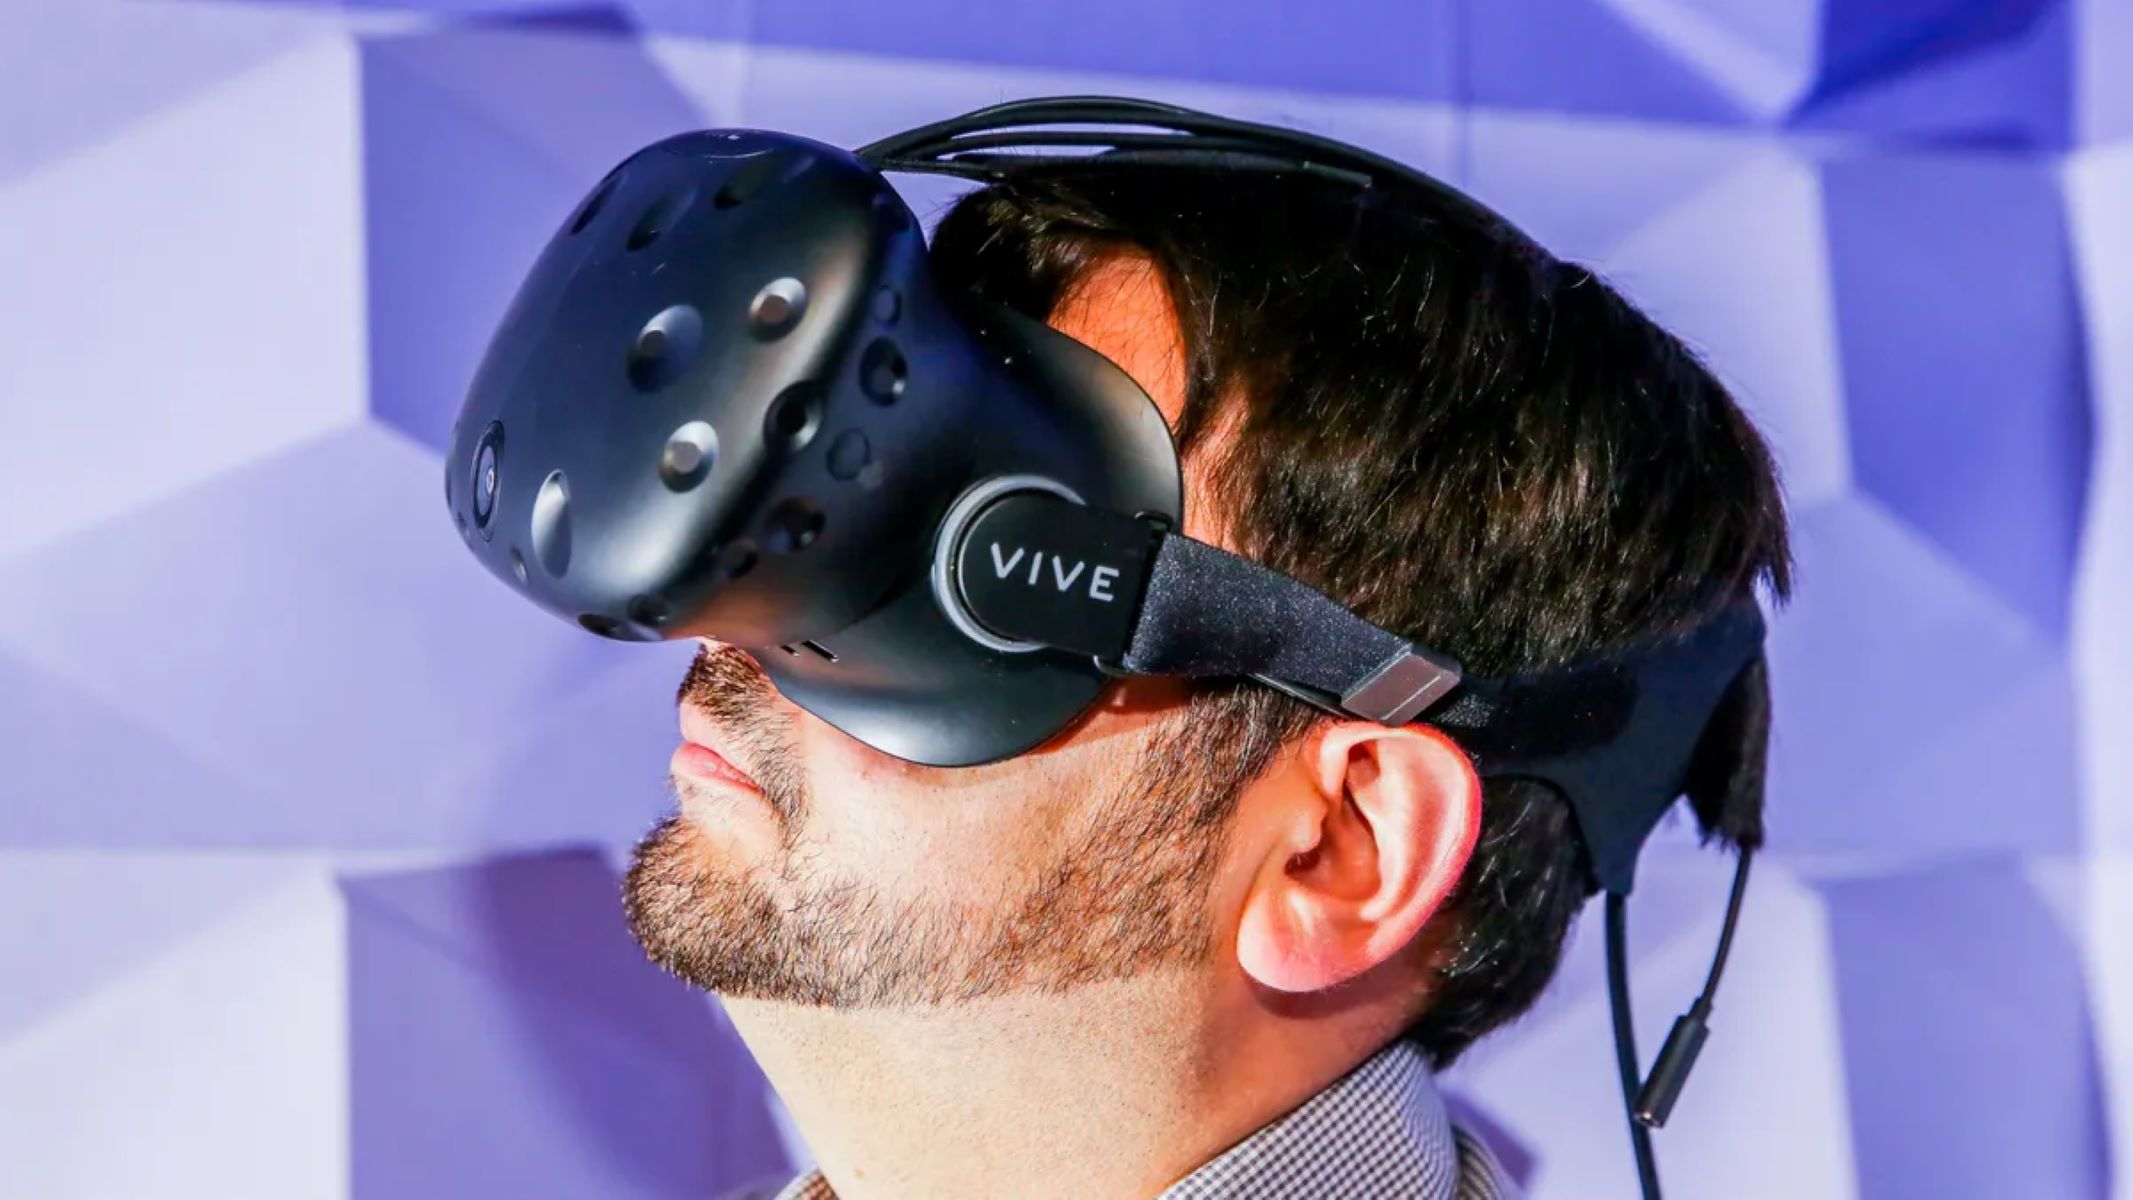 which-company-created-the-htc-vive